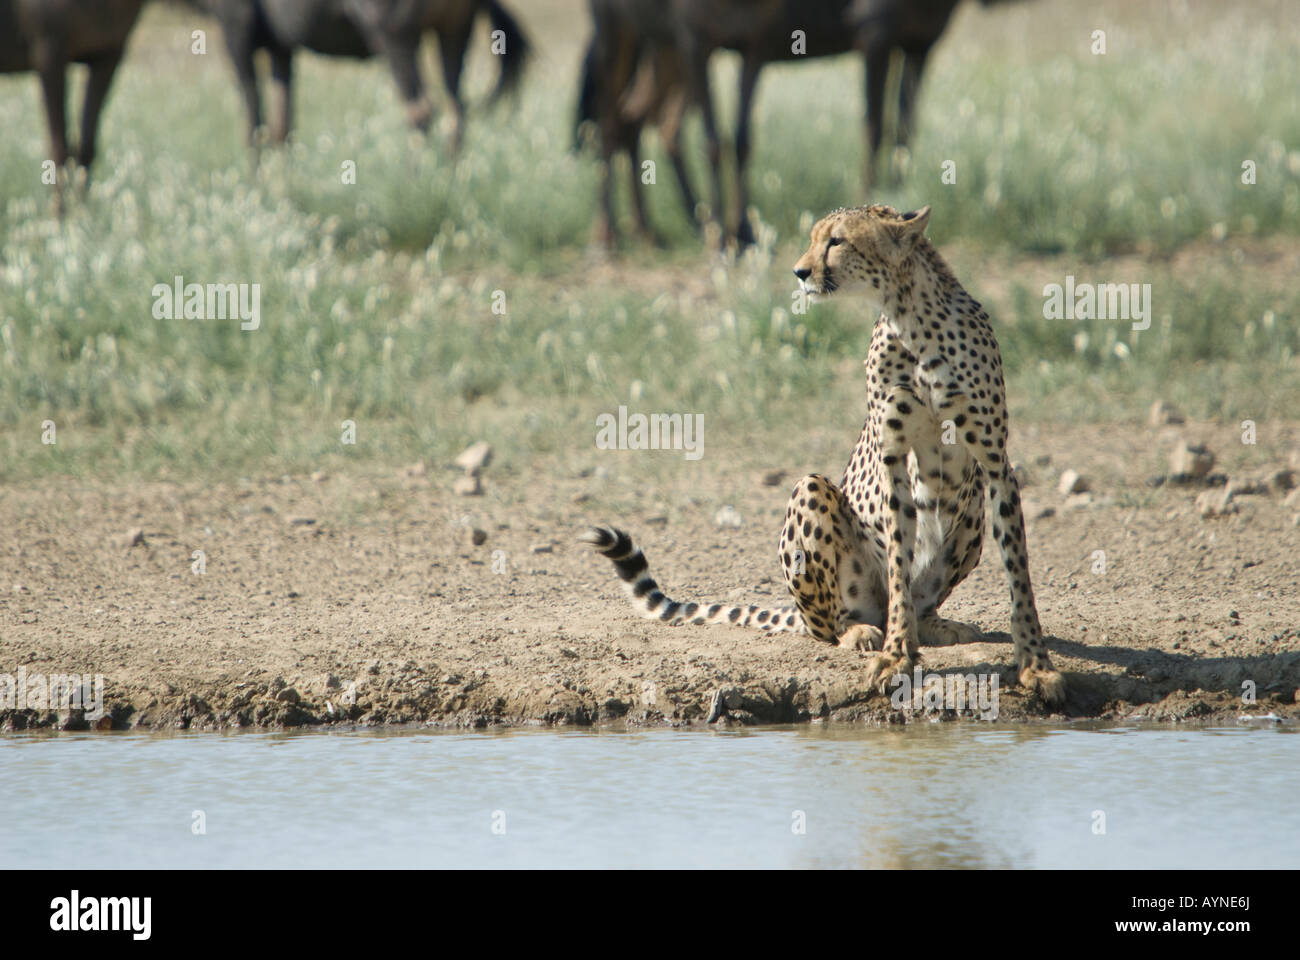 A cheetah sitting next to a waterhole in the Kalahari semi desert with blue wildebeest in the background Stock Photo